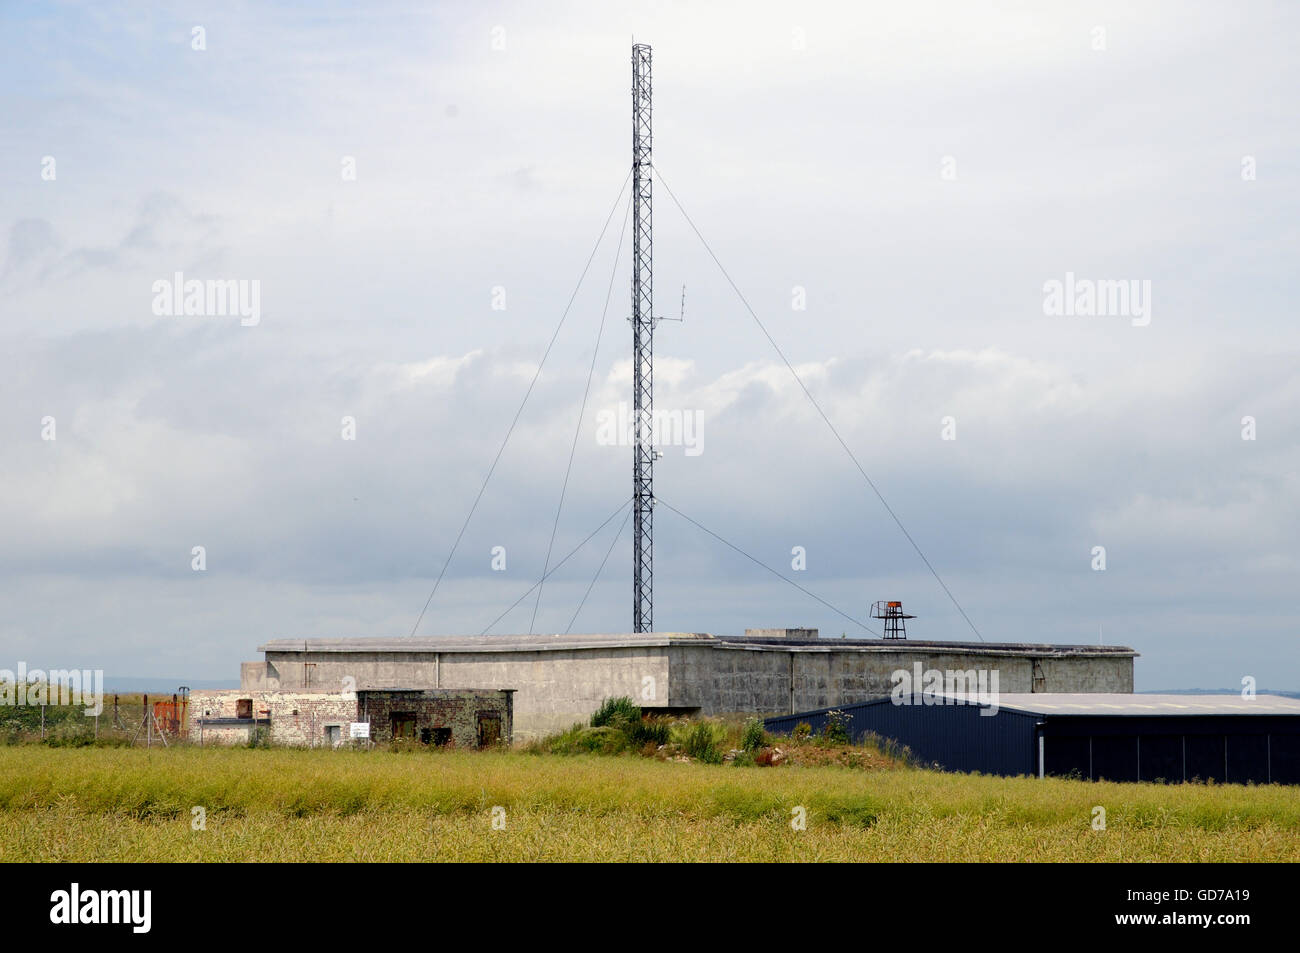 The 1950s concrete bunker at Bolt Head Airfield, Devon. It was built at the height of the Cold War for use in the event of a nuclear attack on Britain. Stock Photo